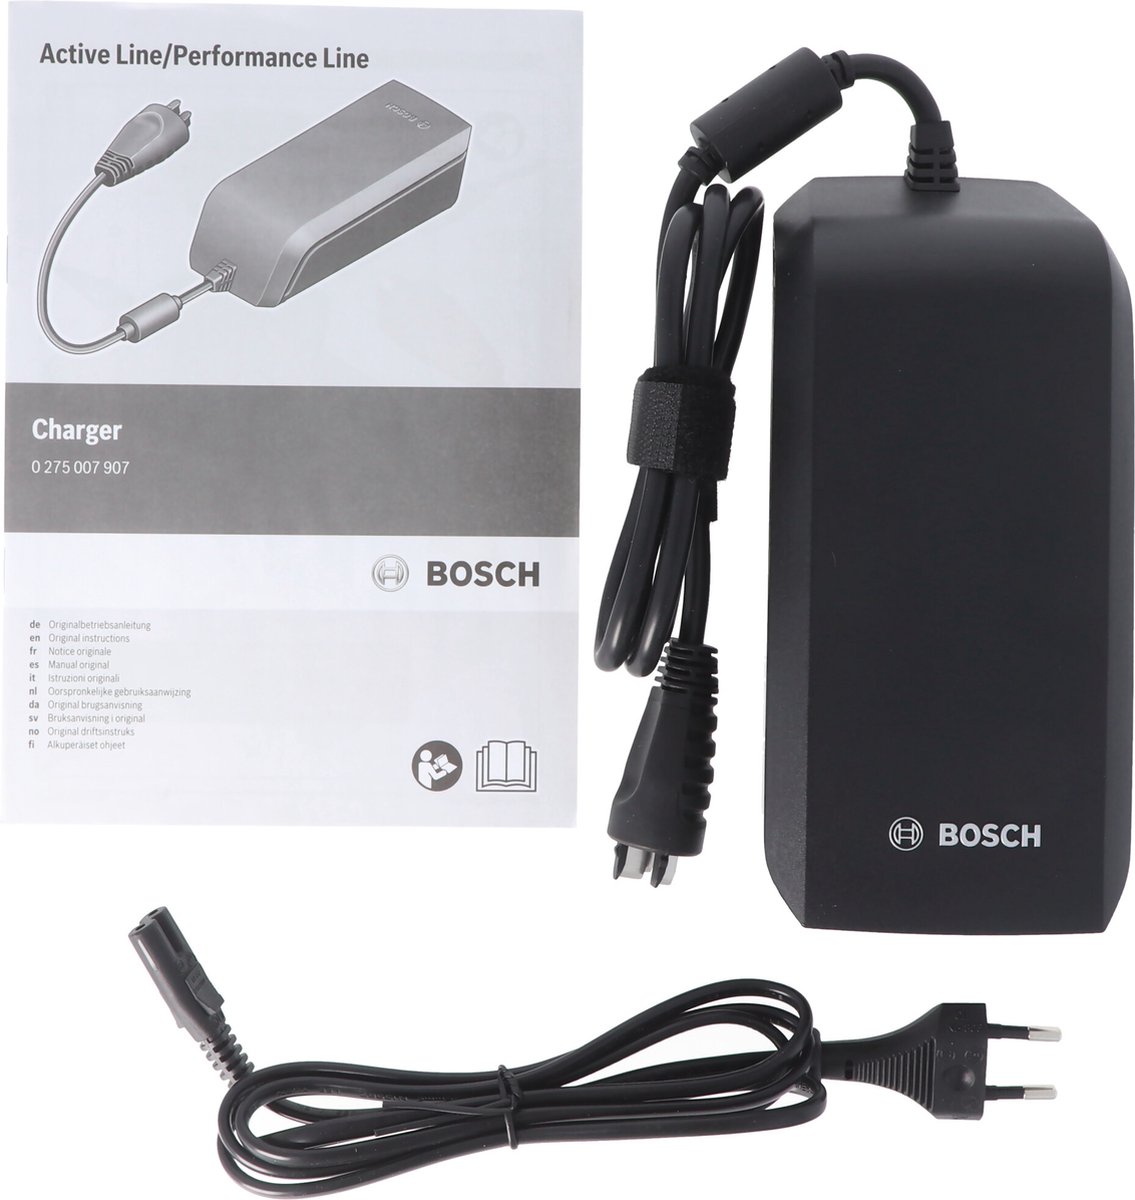 Chargeur Bosch Active/Performance 42V 2A compact